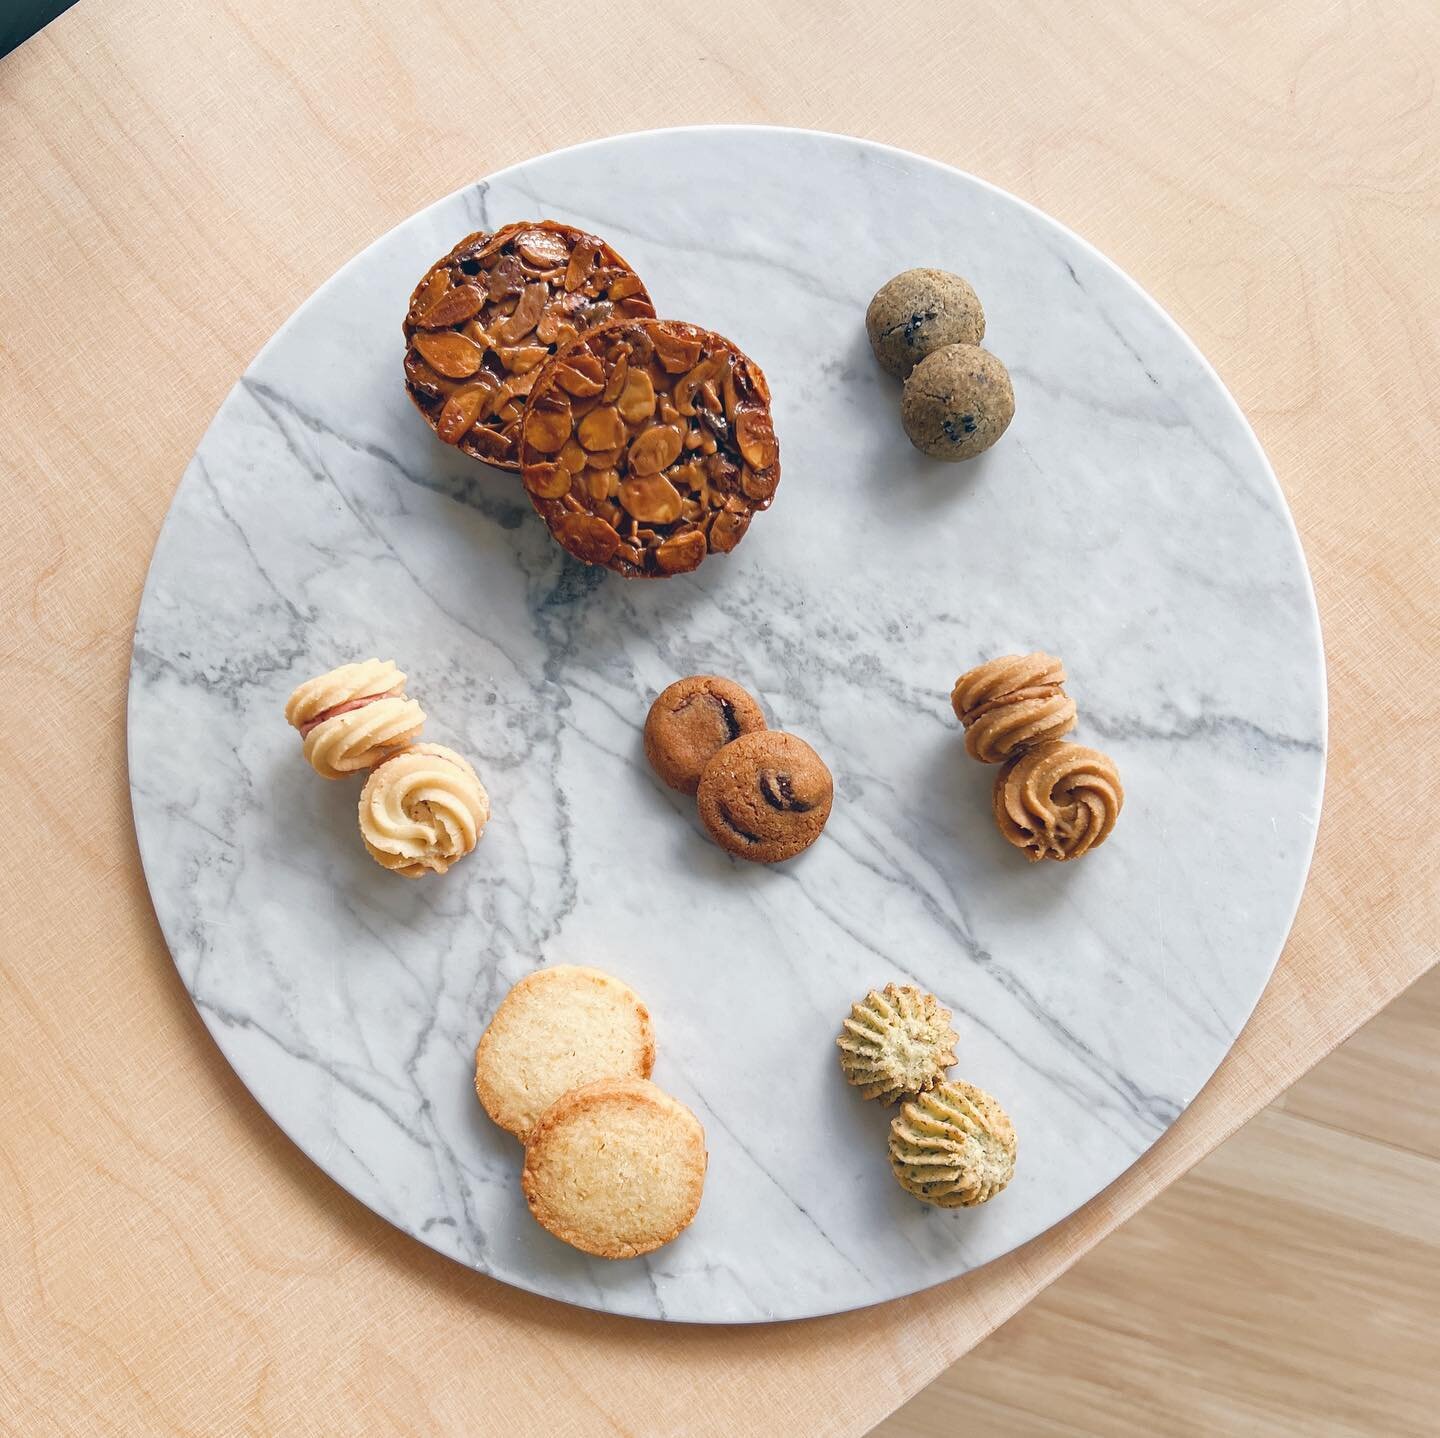 &lt;THE COOKIE BOX V.2&gt;

THREE brand new, off-menu cookies, only available in this box!

Burnt Honey Florentine 
Goma Boule de Neige 
Cranberry Viennese Whirls 
Coffee &amp; Speculoos Viennese Whirls 
Mini Chocolate Chip Cookies 
Pineapple Shortbr